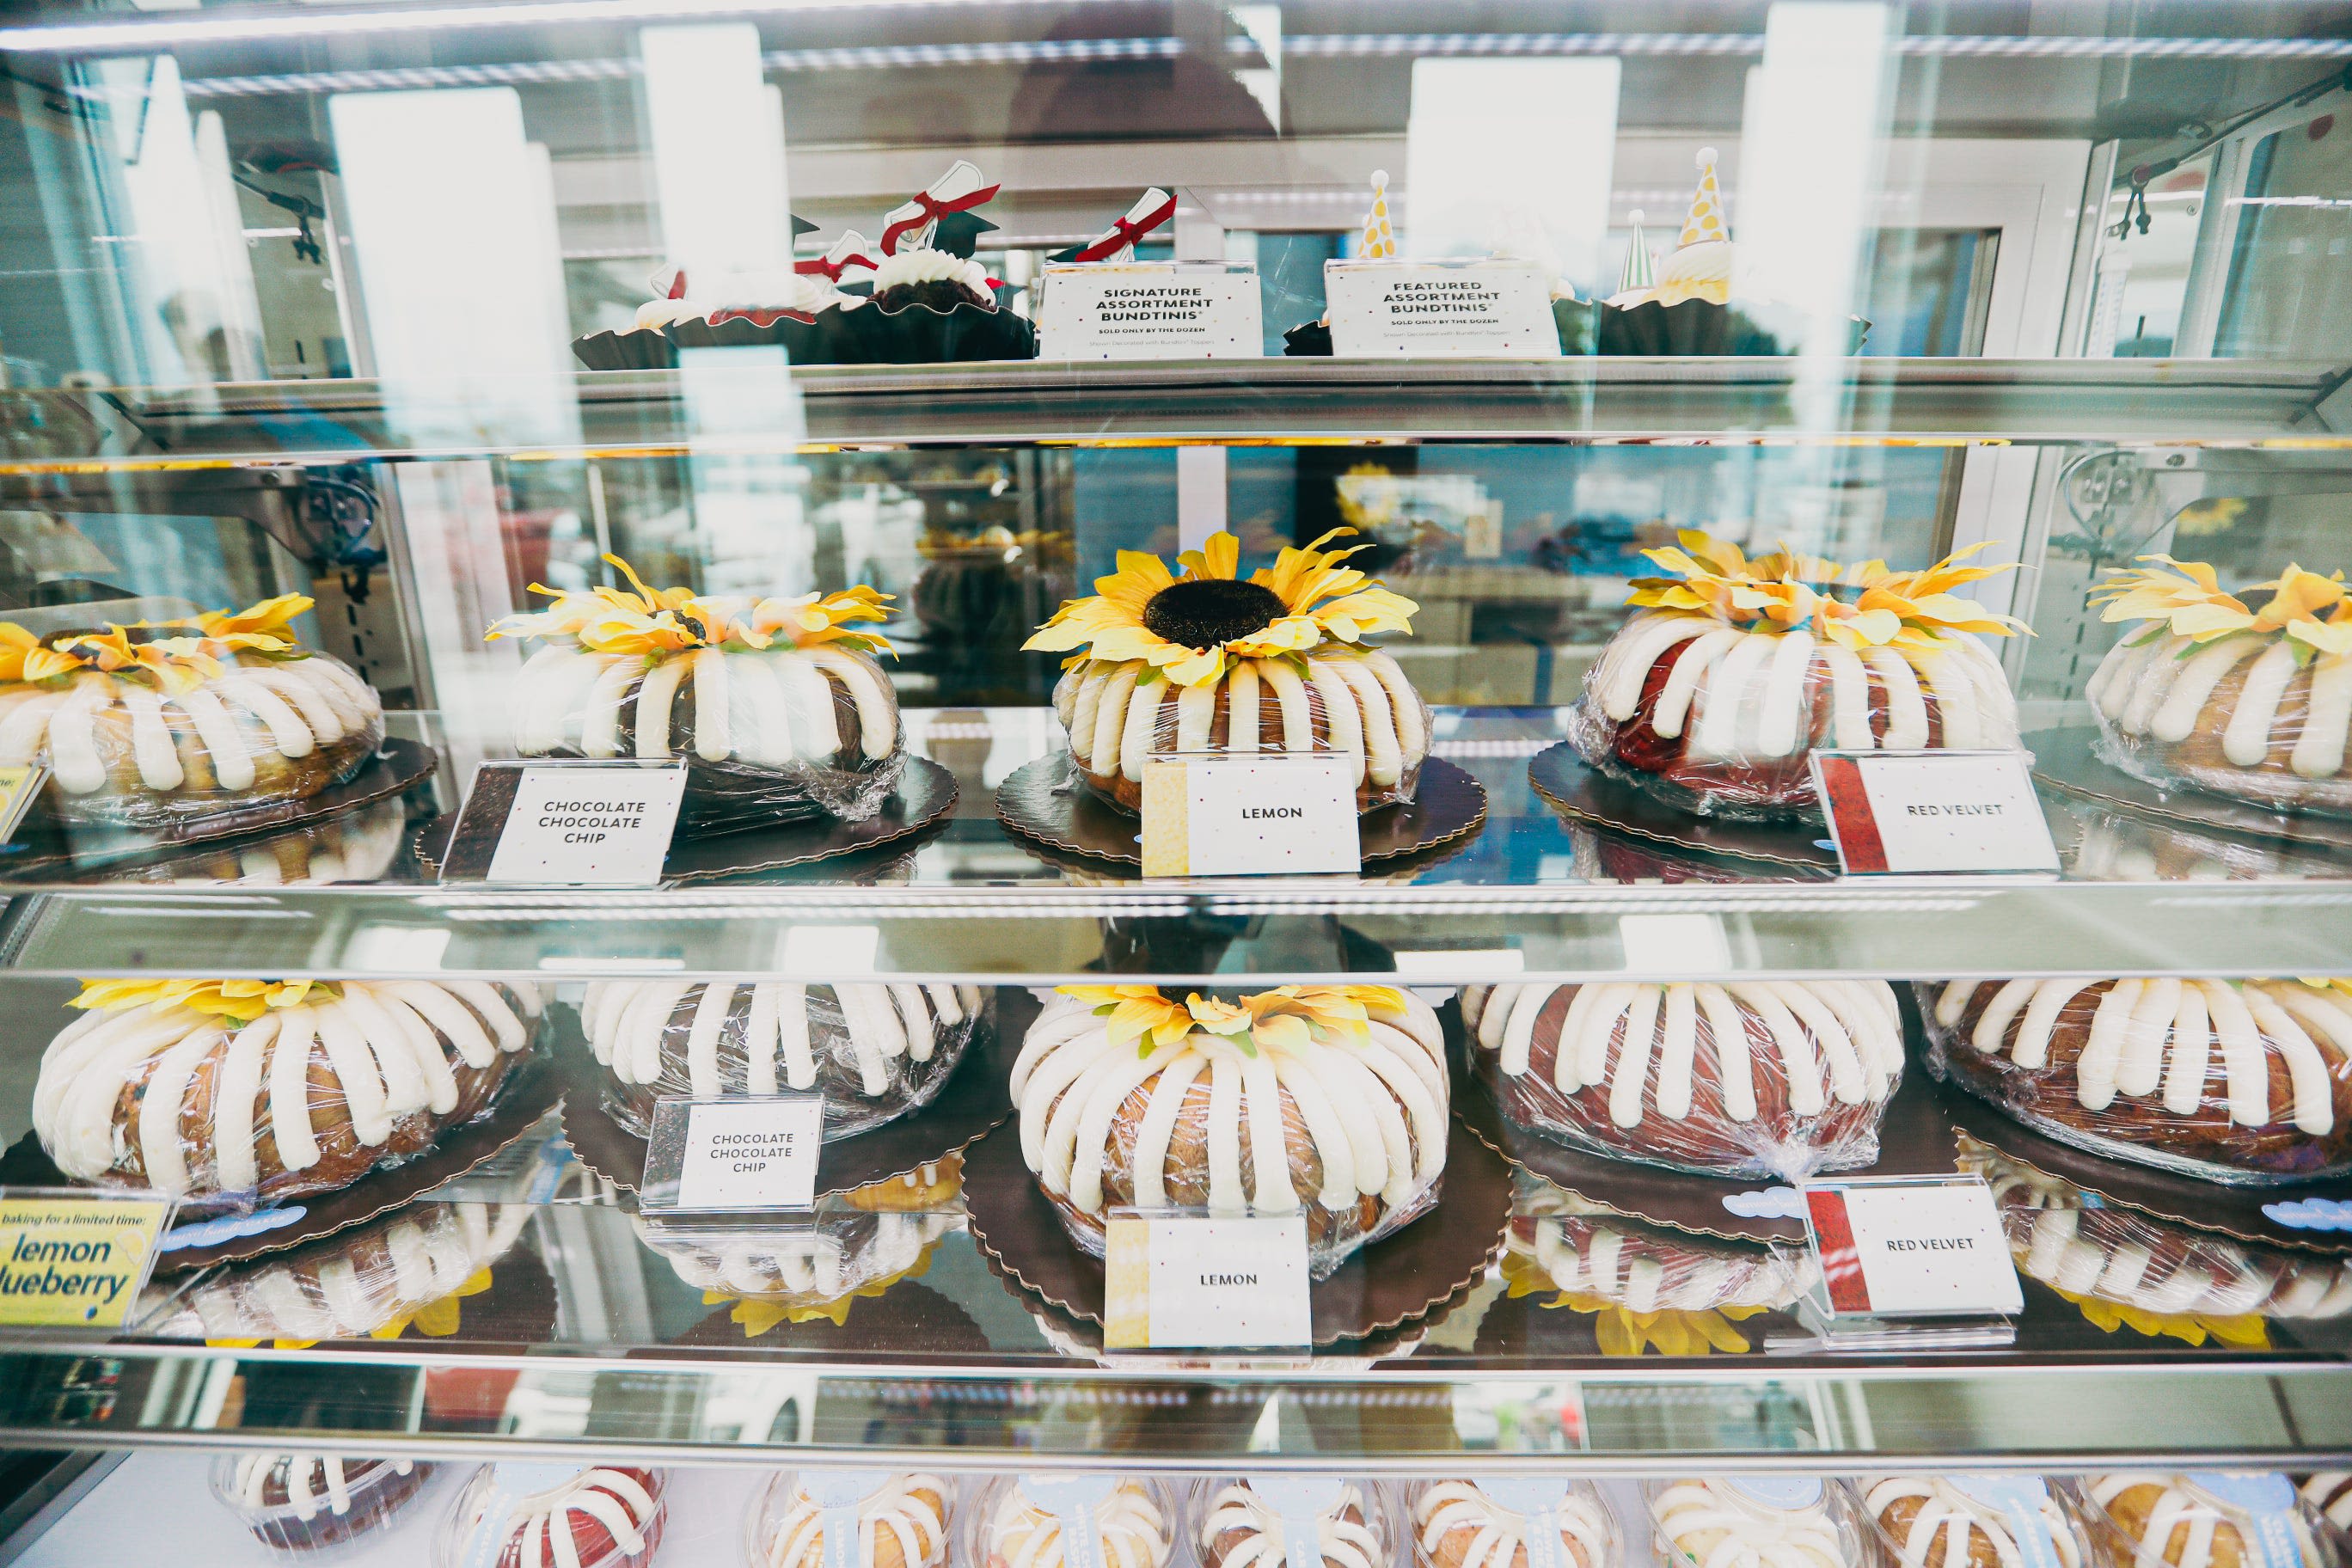 Enjoy free birthday treats from Nothing Bundt Cakes, Chick-fil-A and more